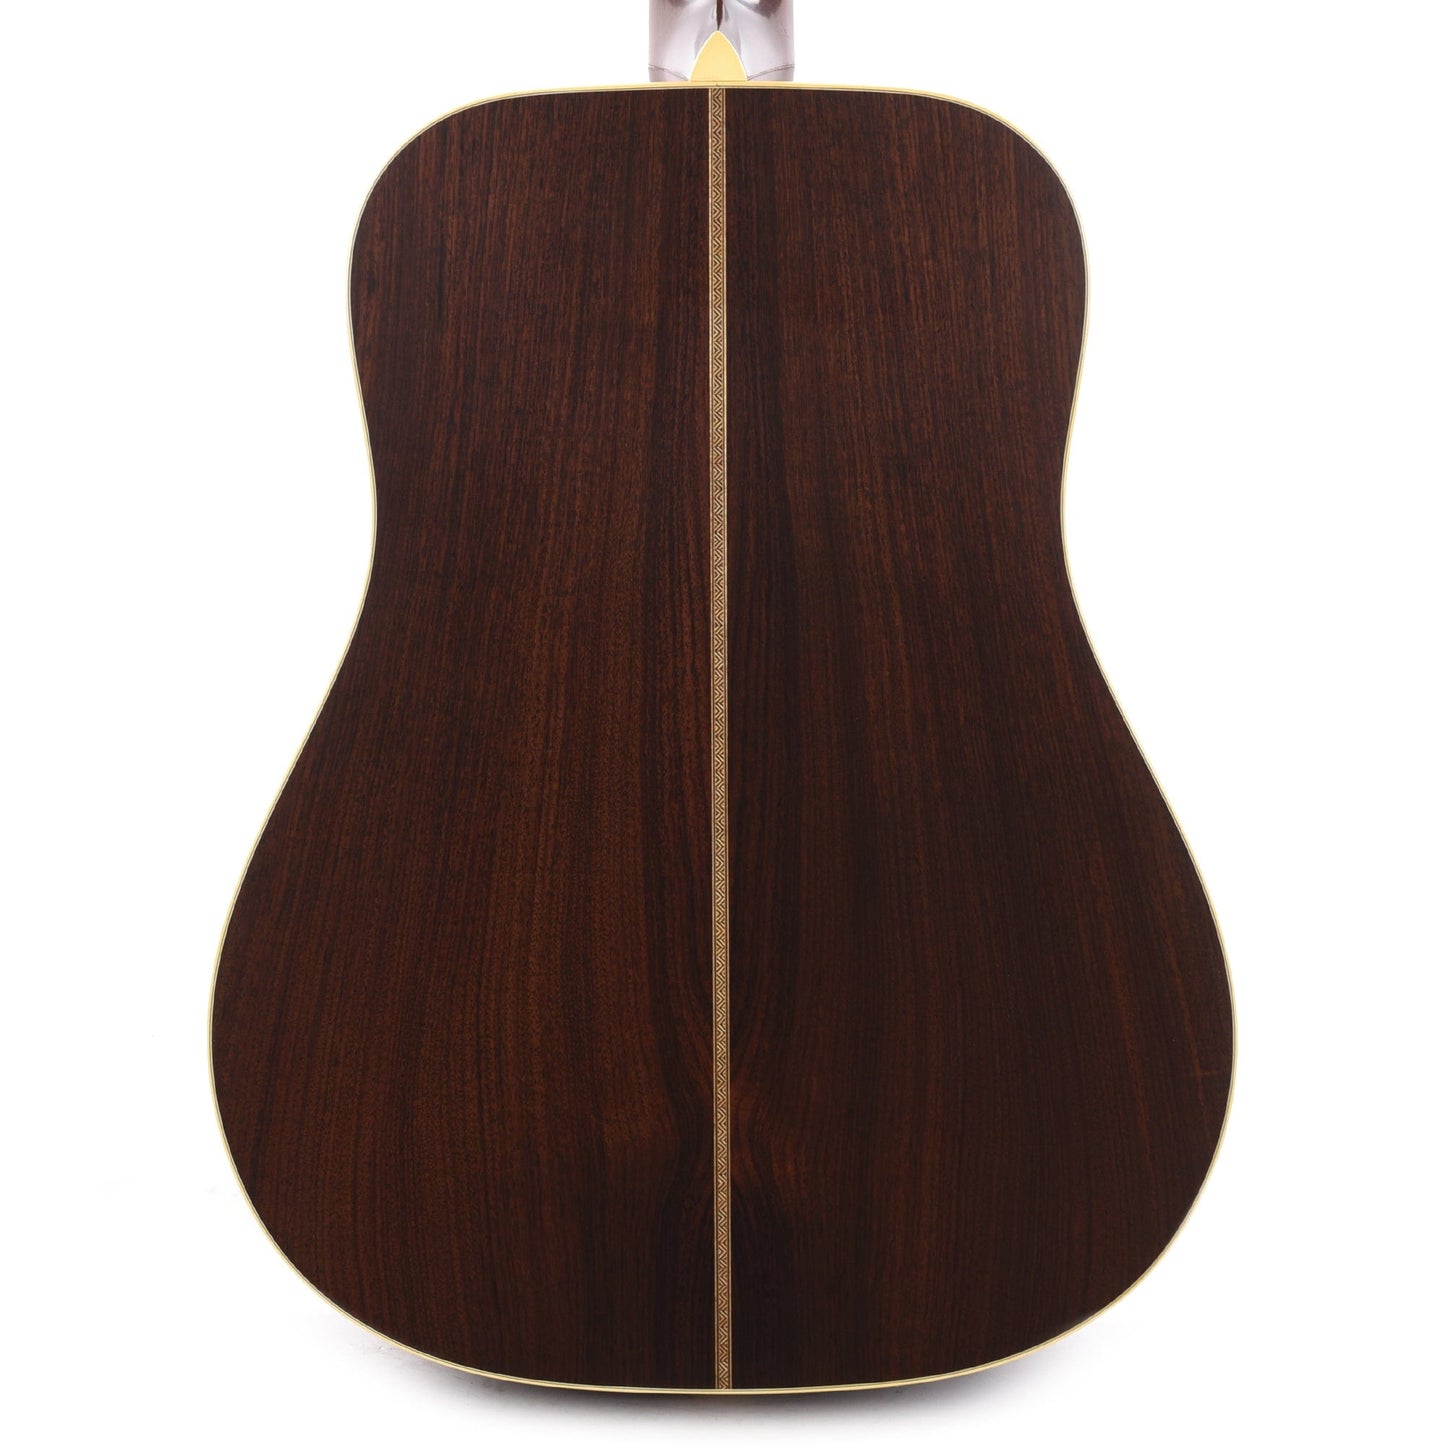 Martin Custom Shop D-28 Authentic 1937 Aged Natural Vintage Low Gloss Acoustic Guitars / Dreadnought